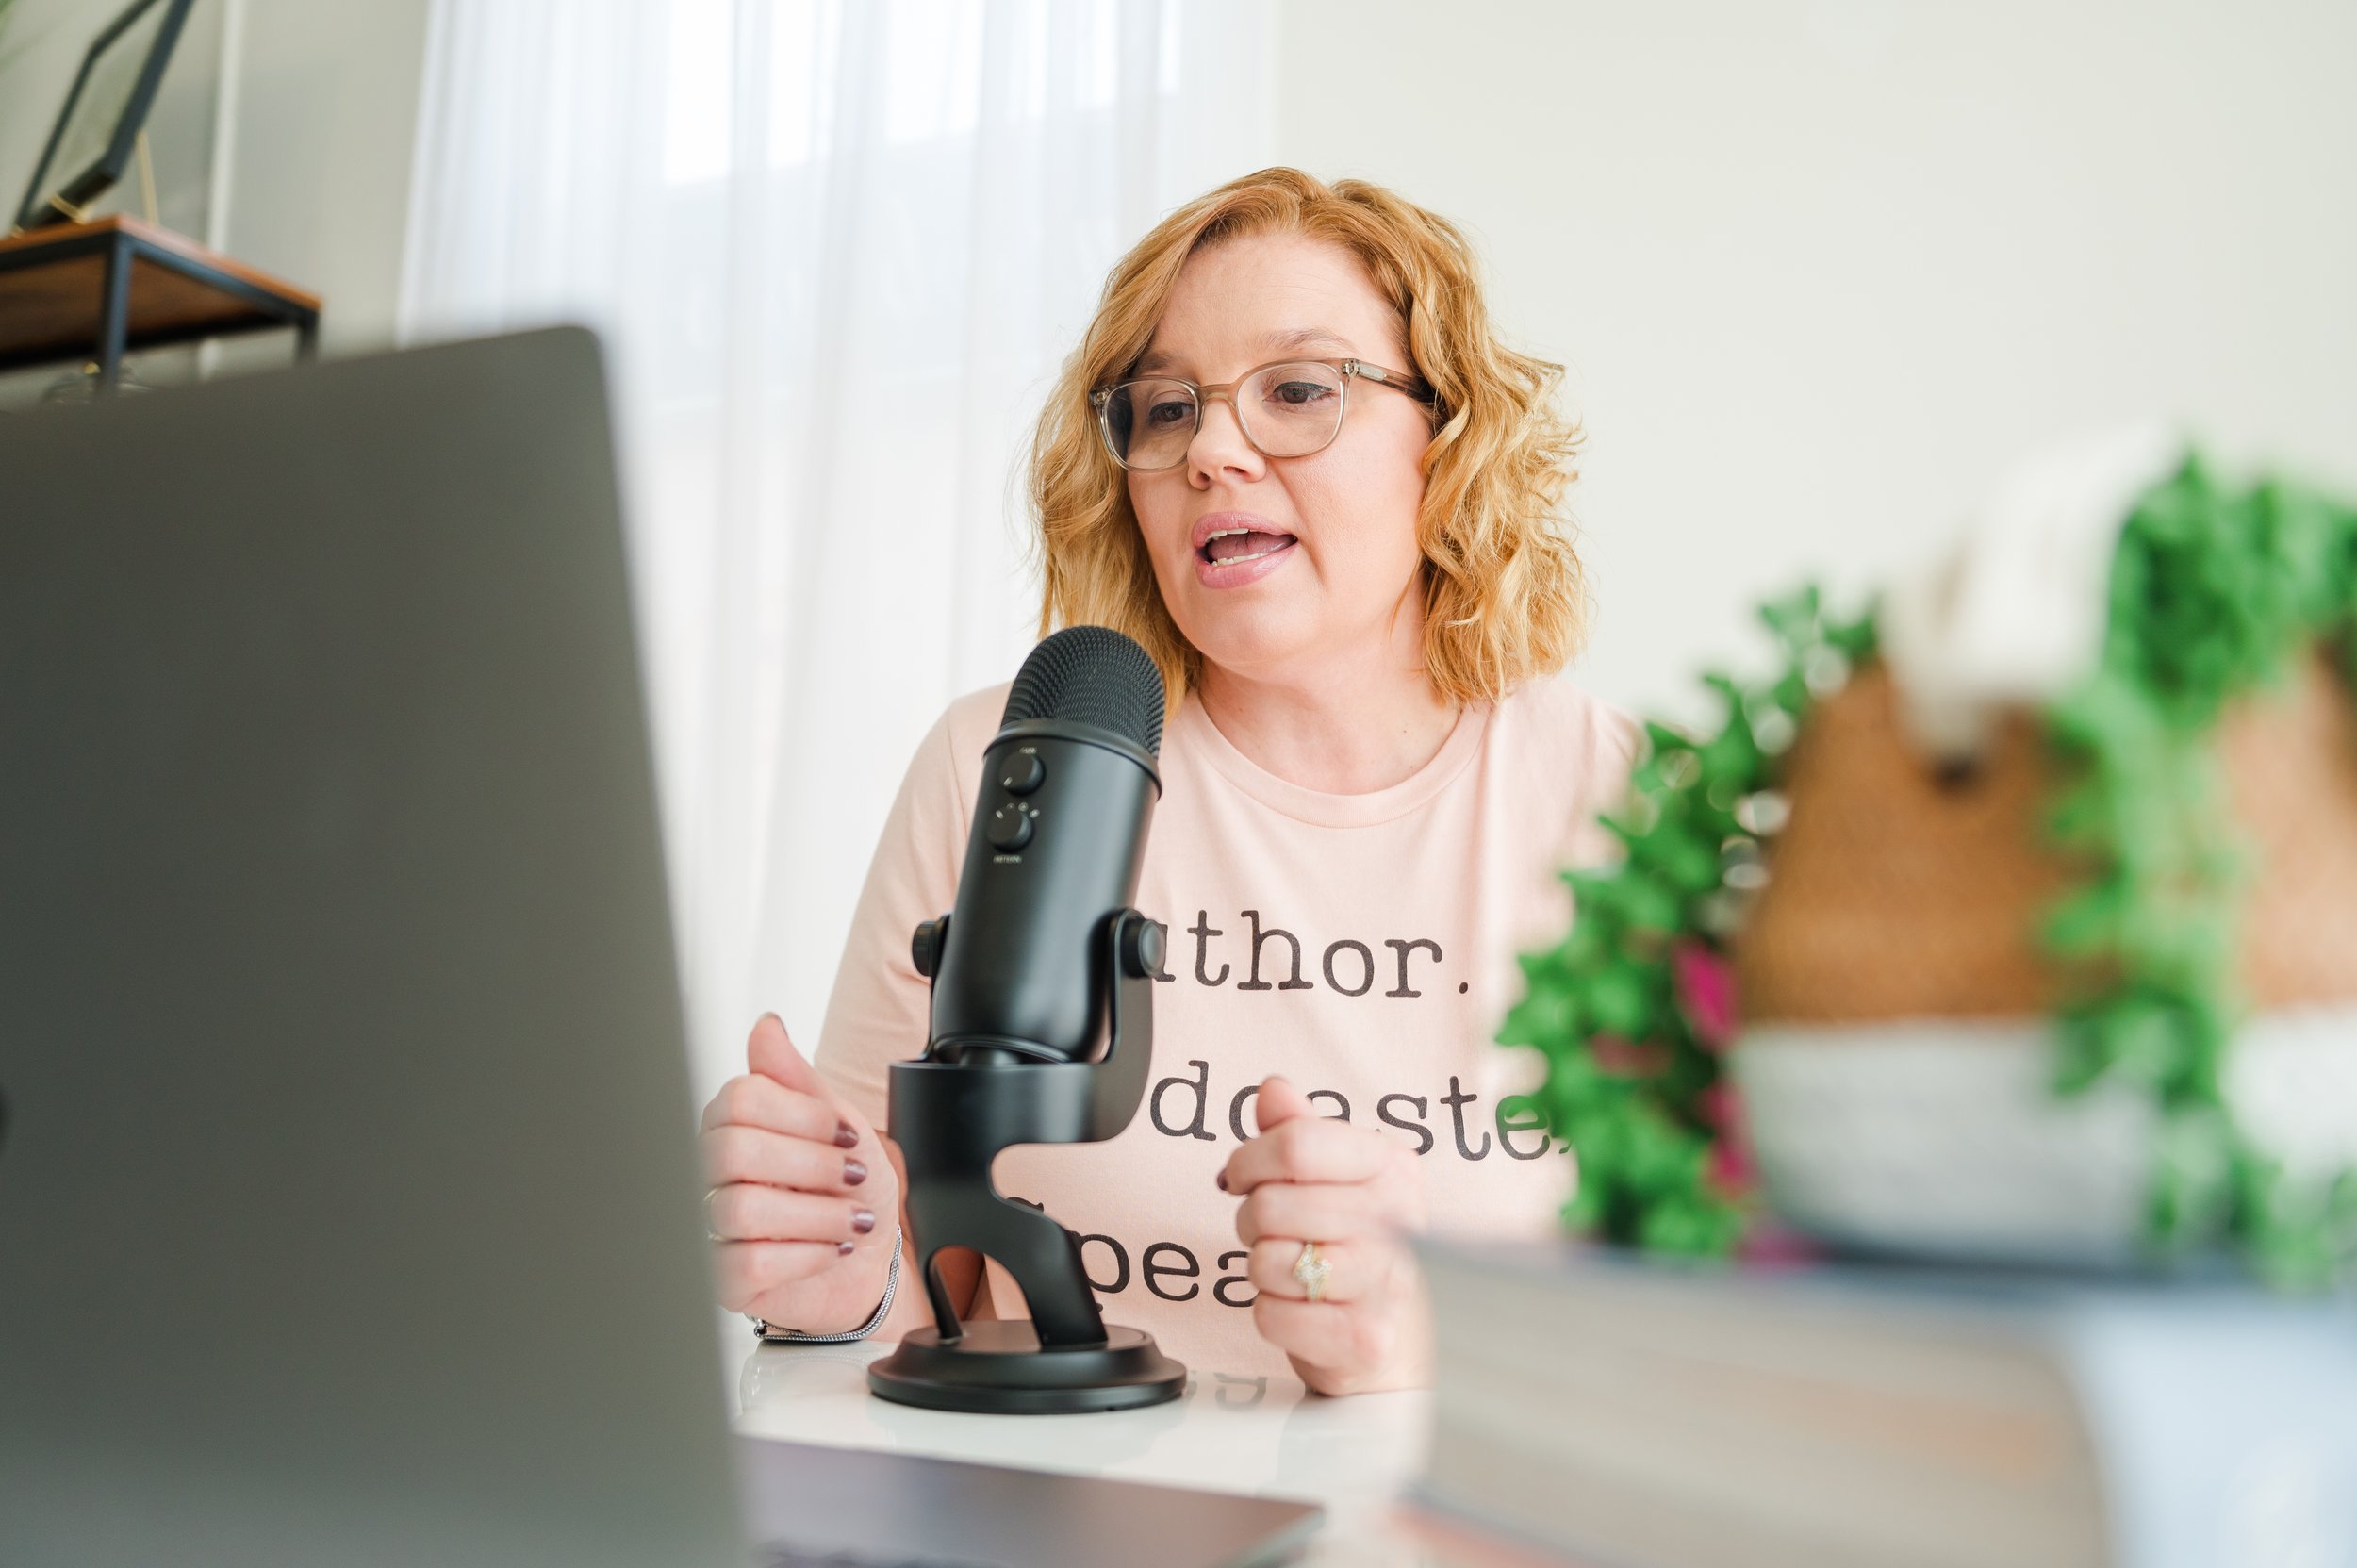 author and podcaster sitting at desk recording 